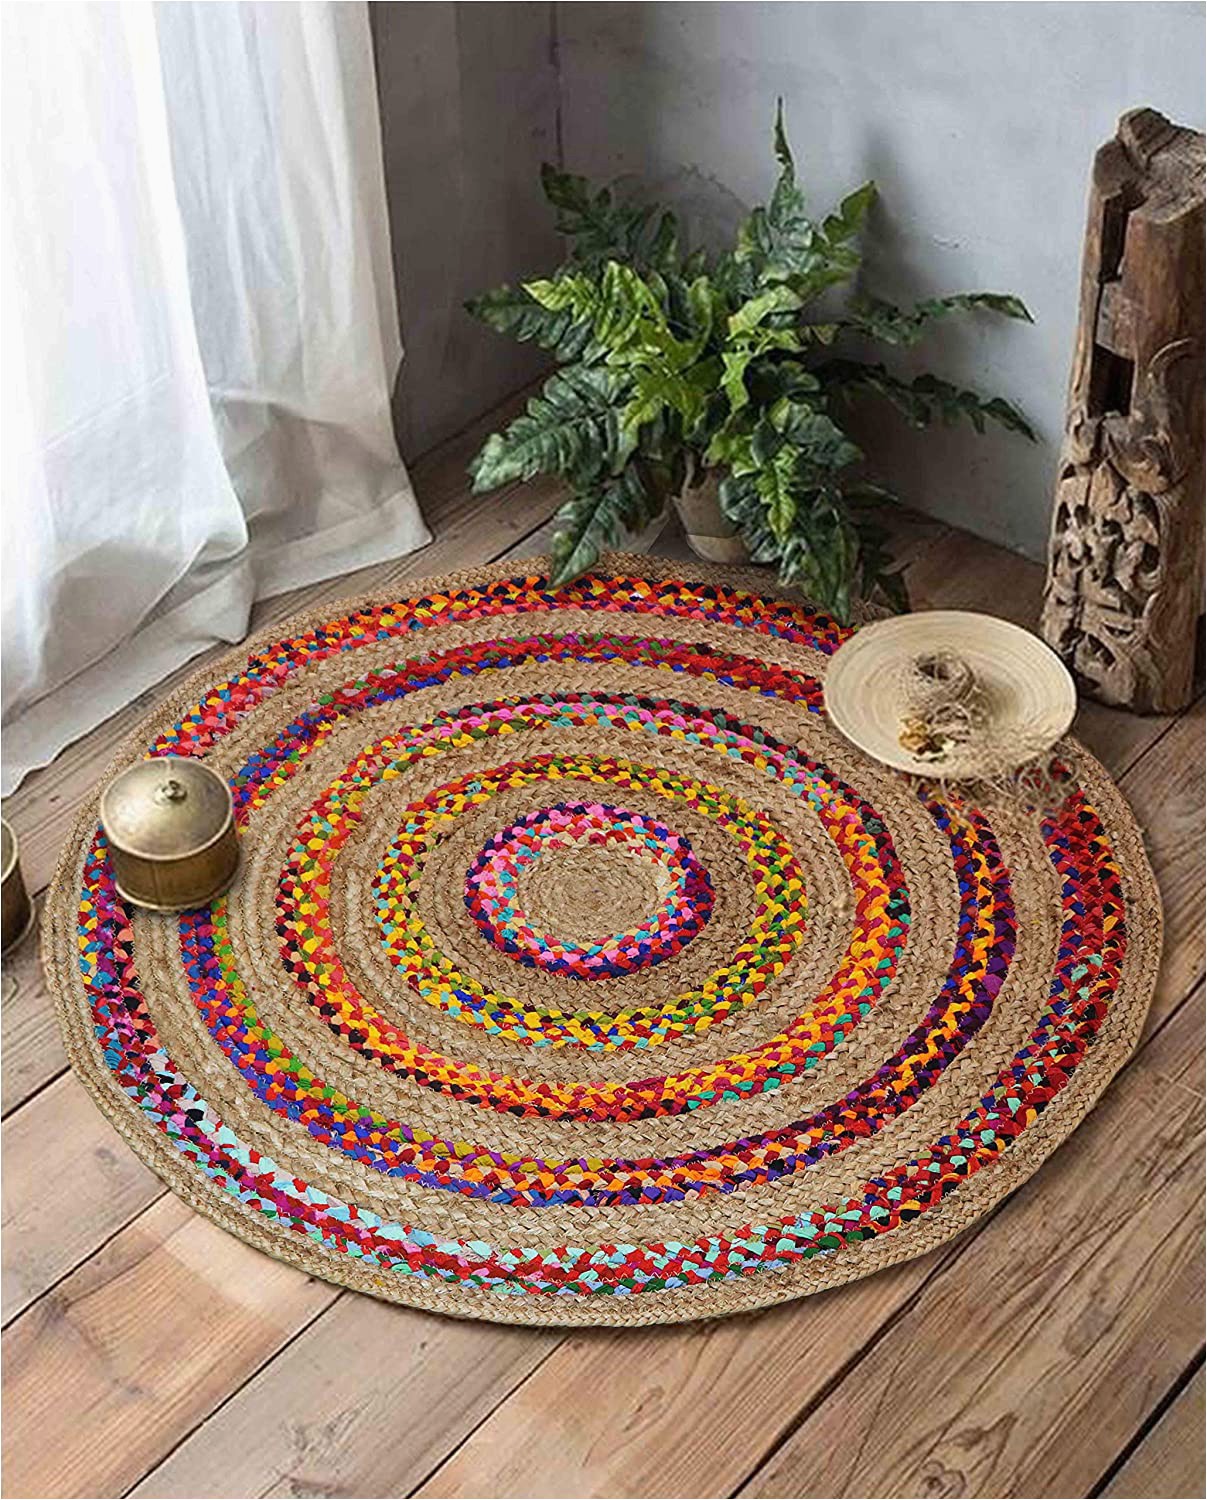 Round area Rugs 5 X 5 Hand Braided Circular 5 X 5 area Rugs for Living Room Natural Jute Bedroom Rugs